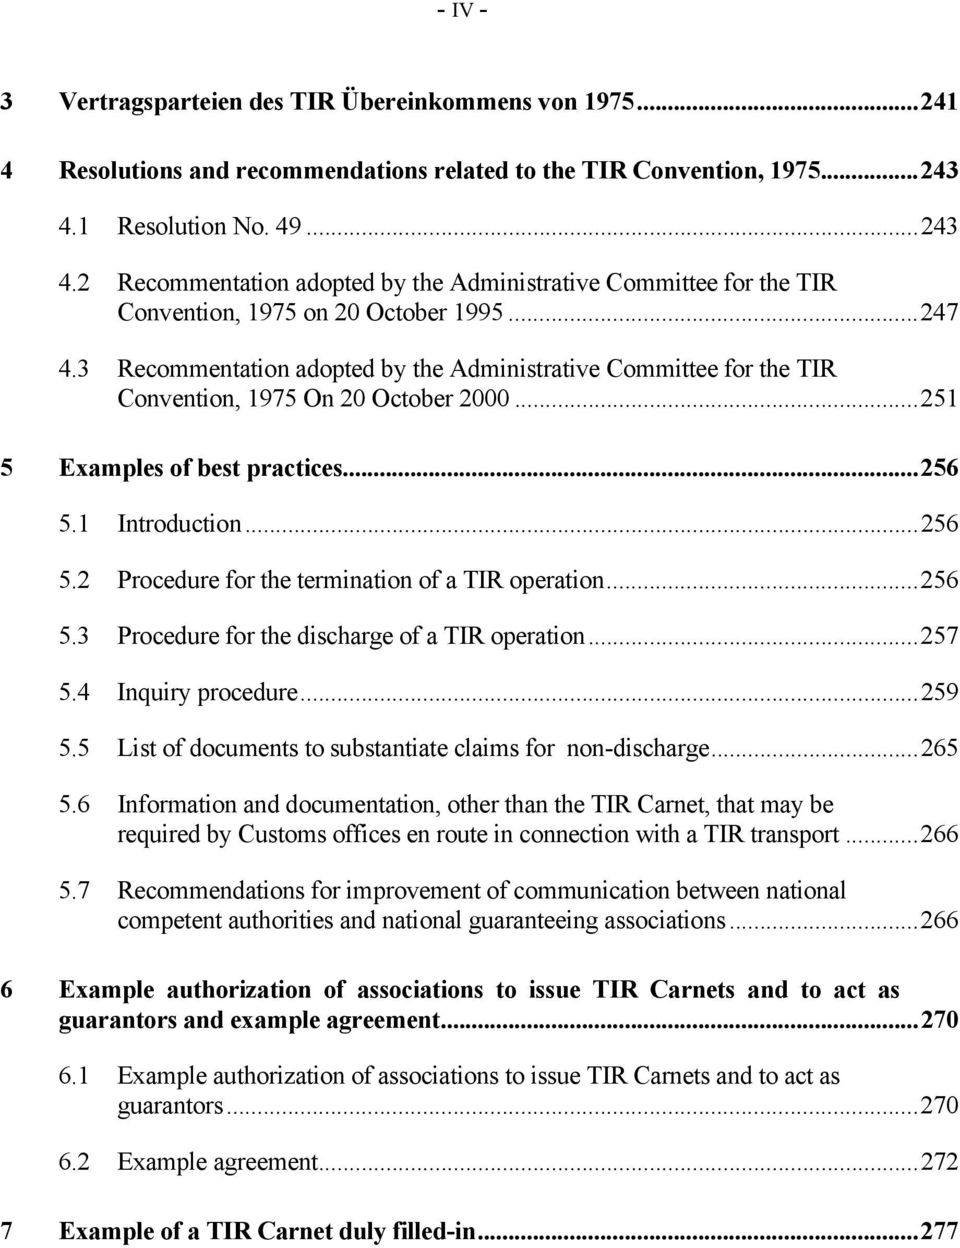 3 Recommentation adopted by the Administrative Committee for the TIR Convention, 1975 On 20 October 2000...251 5 Examples of best practices...256 5.1 Introduction...256 5.2 Procedure for the termination of a TIR operation.